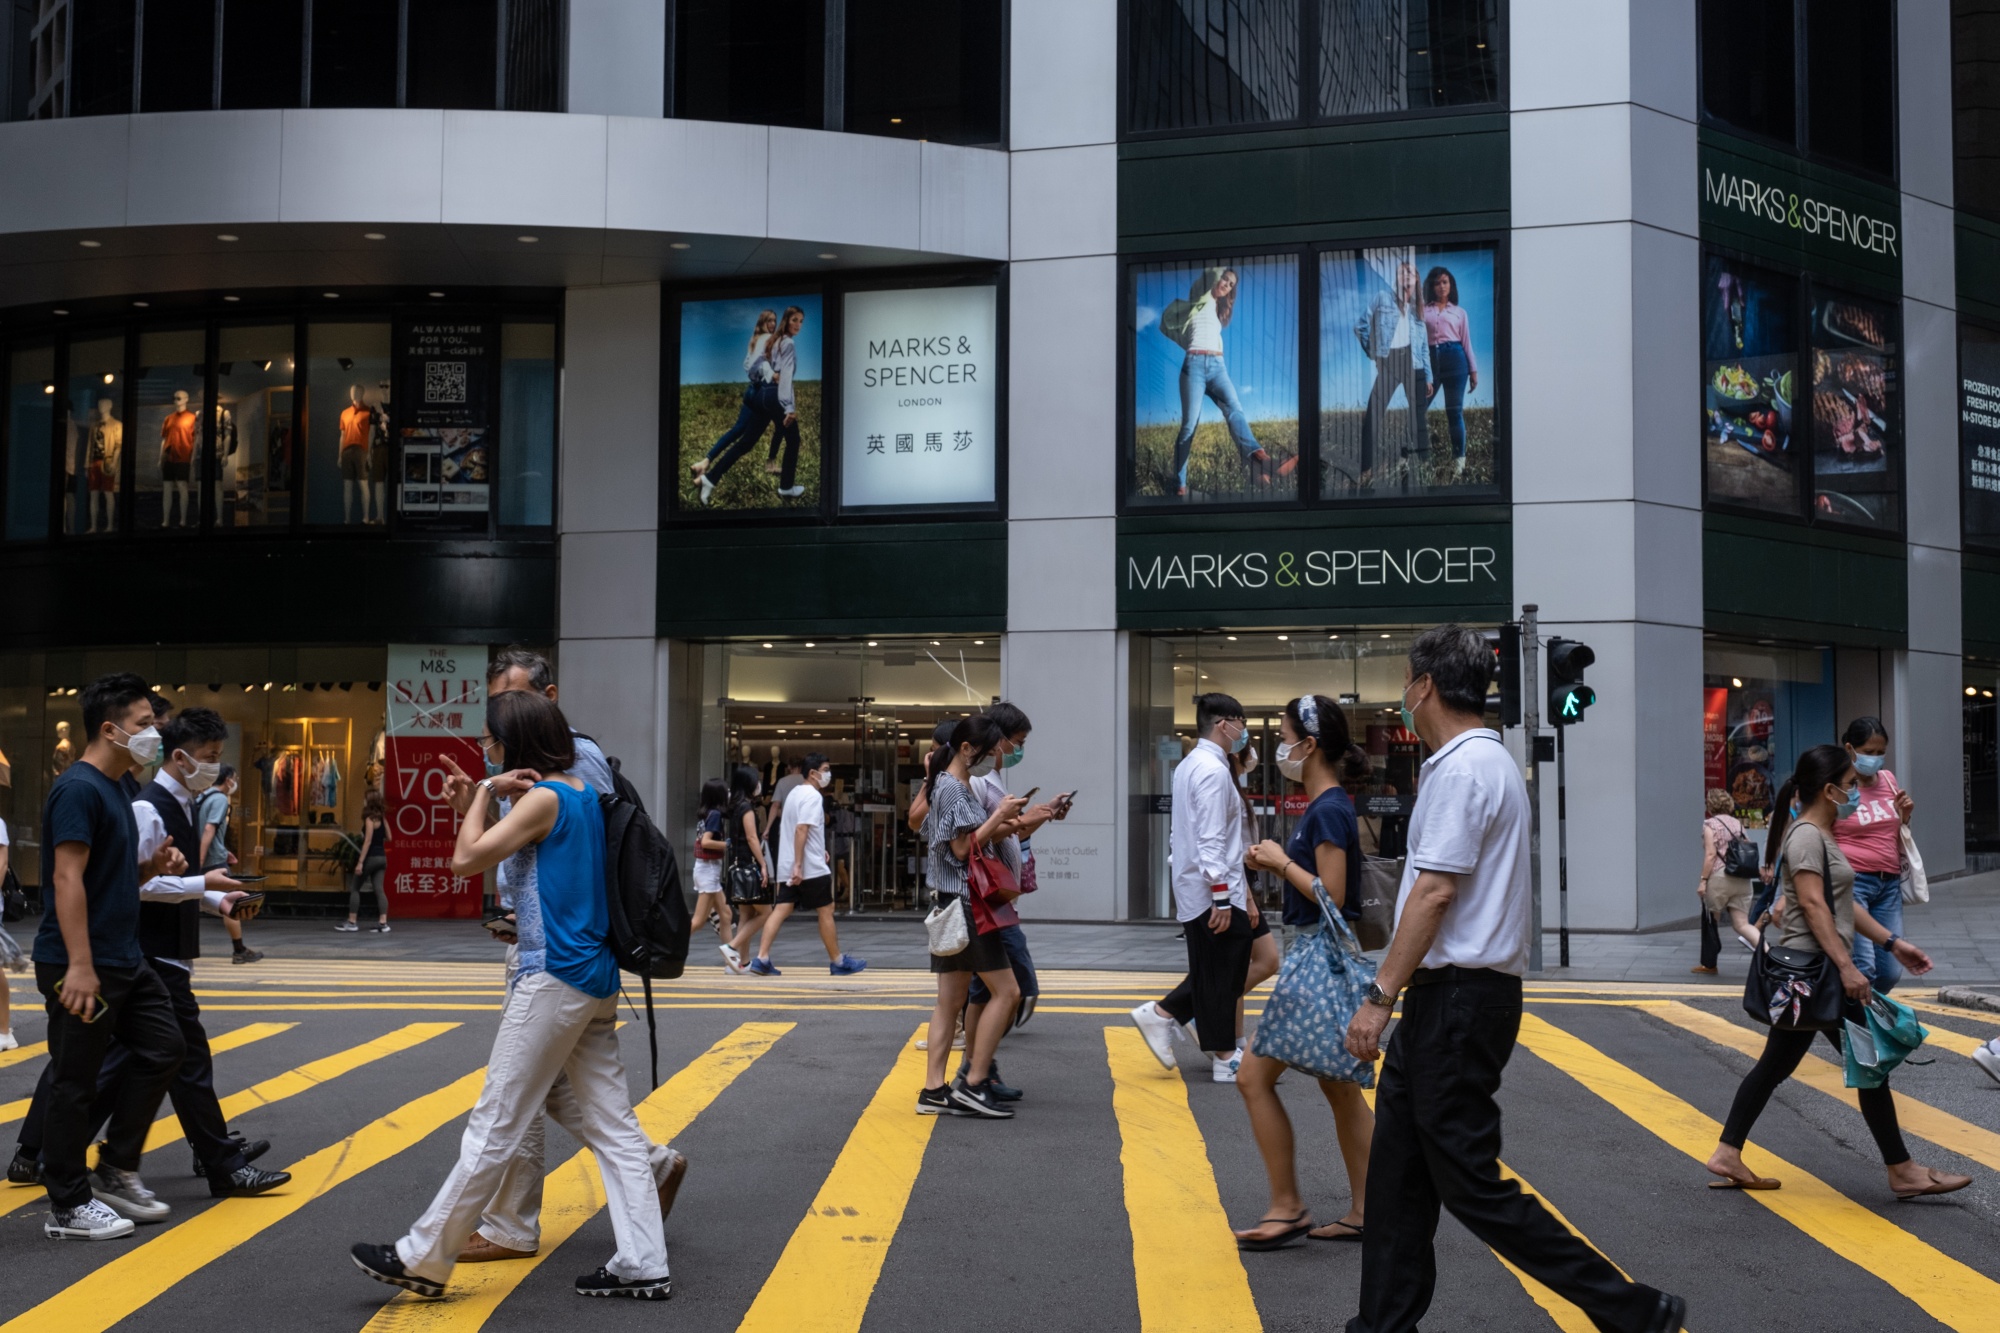 Retail Economy as Hong Kong Grapples With New Coronavirus Outbreak